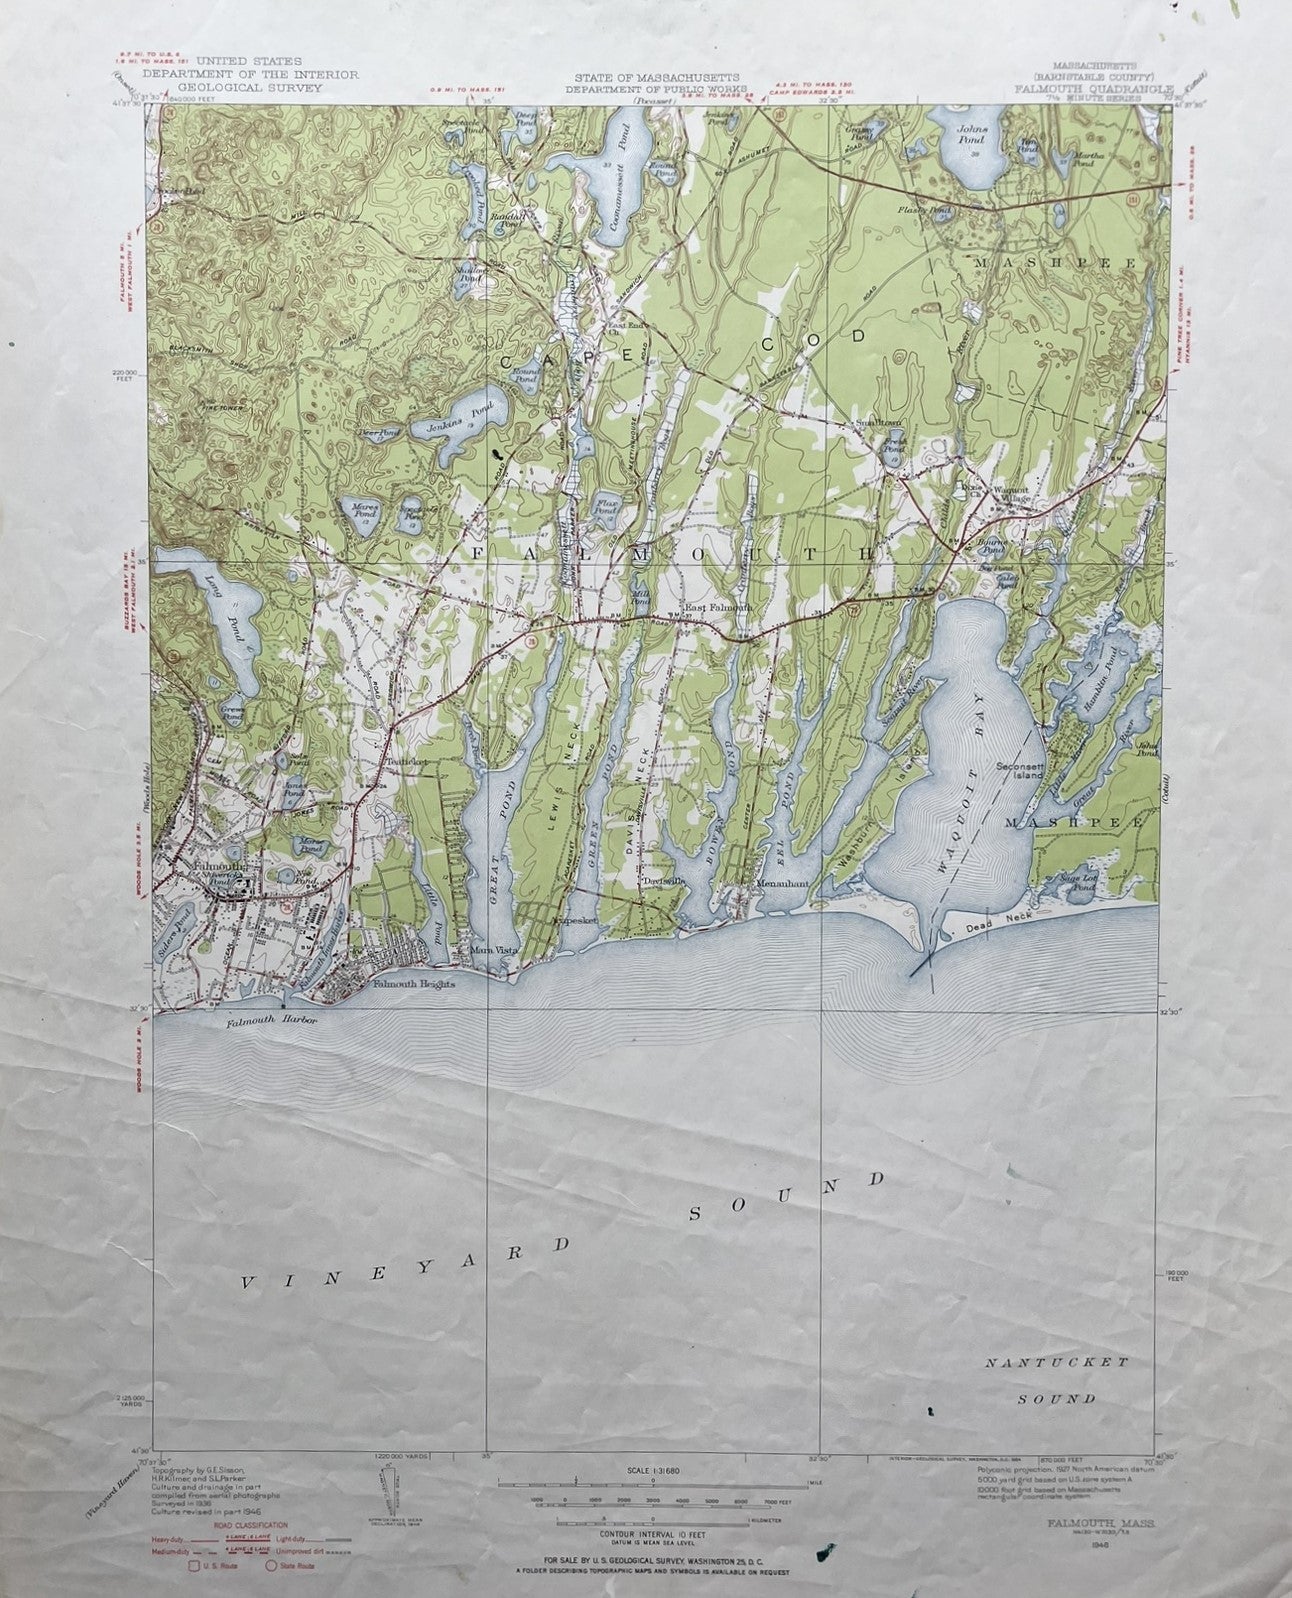 Genuine-Vintage-Map-Falmouth-Mass-Cape-Cod-Antique-Topographic-Map-1946-USGS-U-S-Geological-Survey-Maps-Of-Antiquity